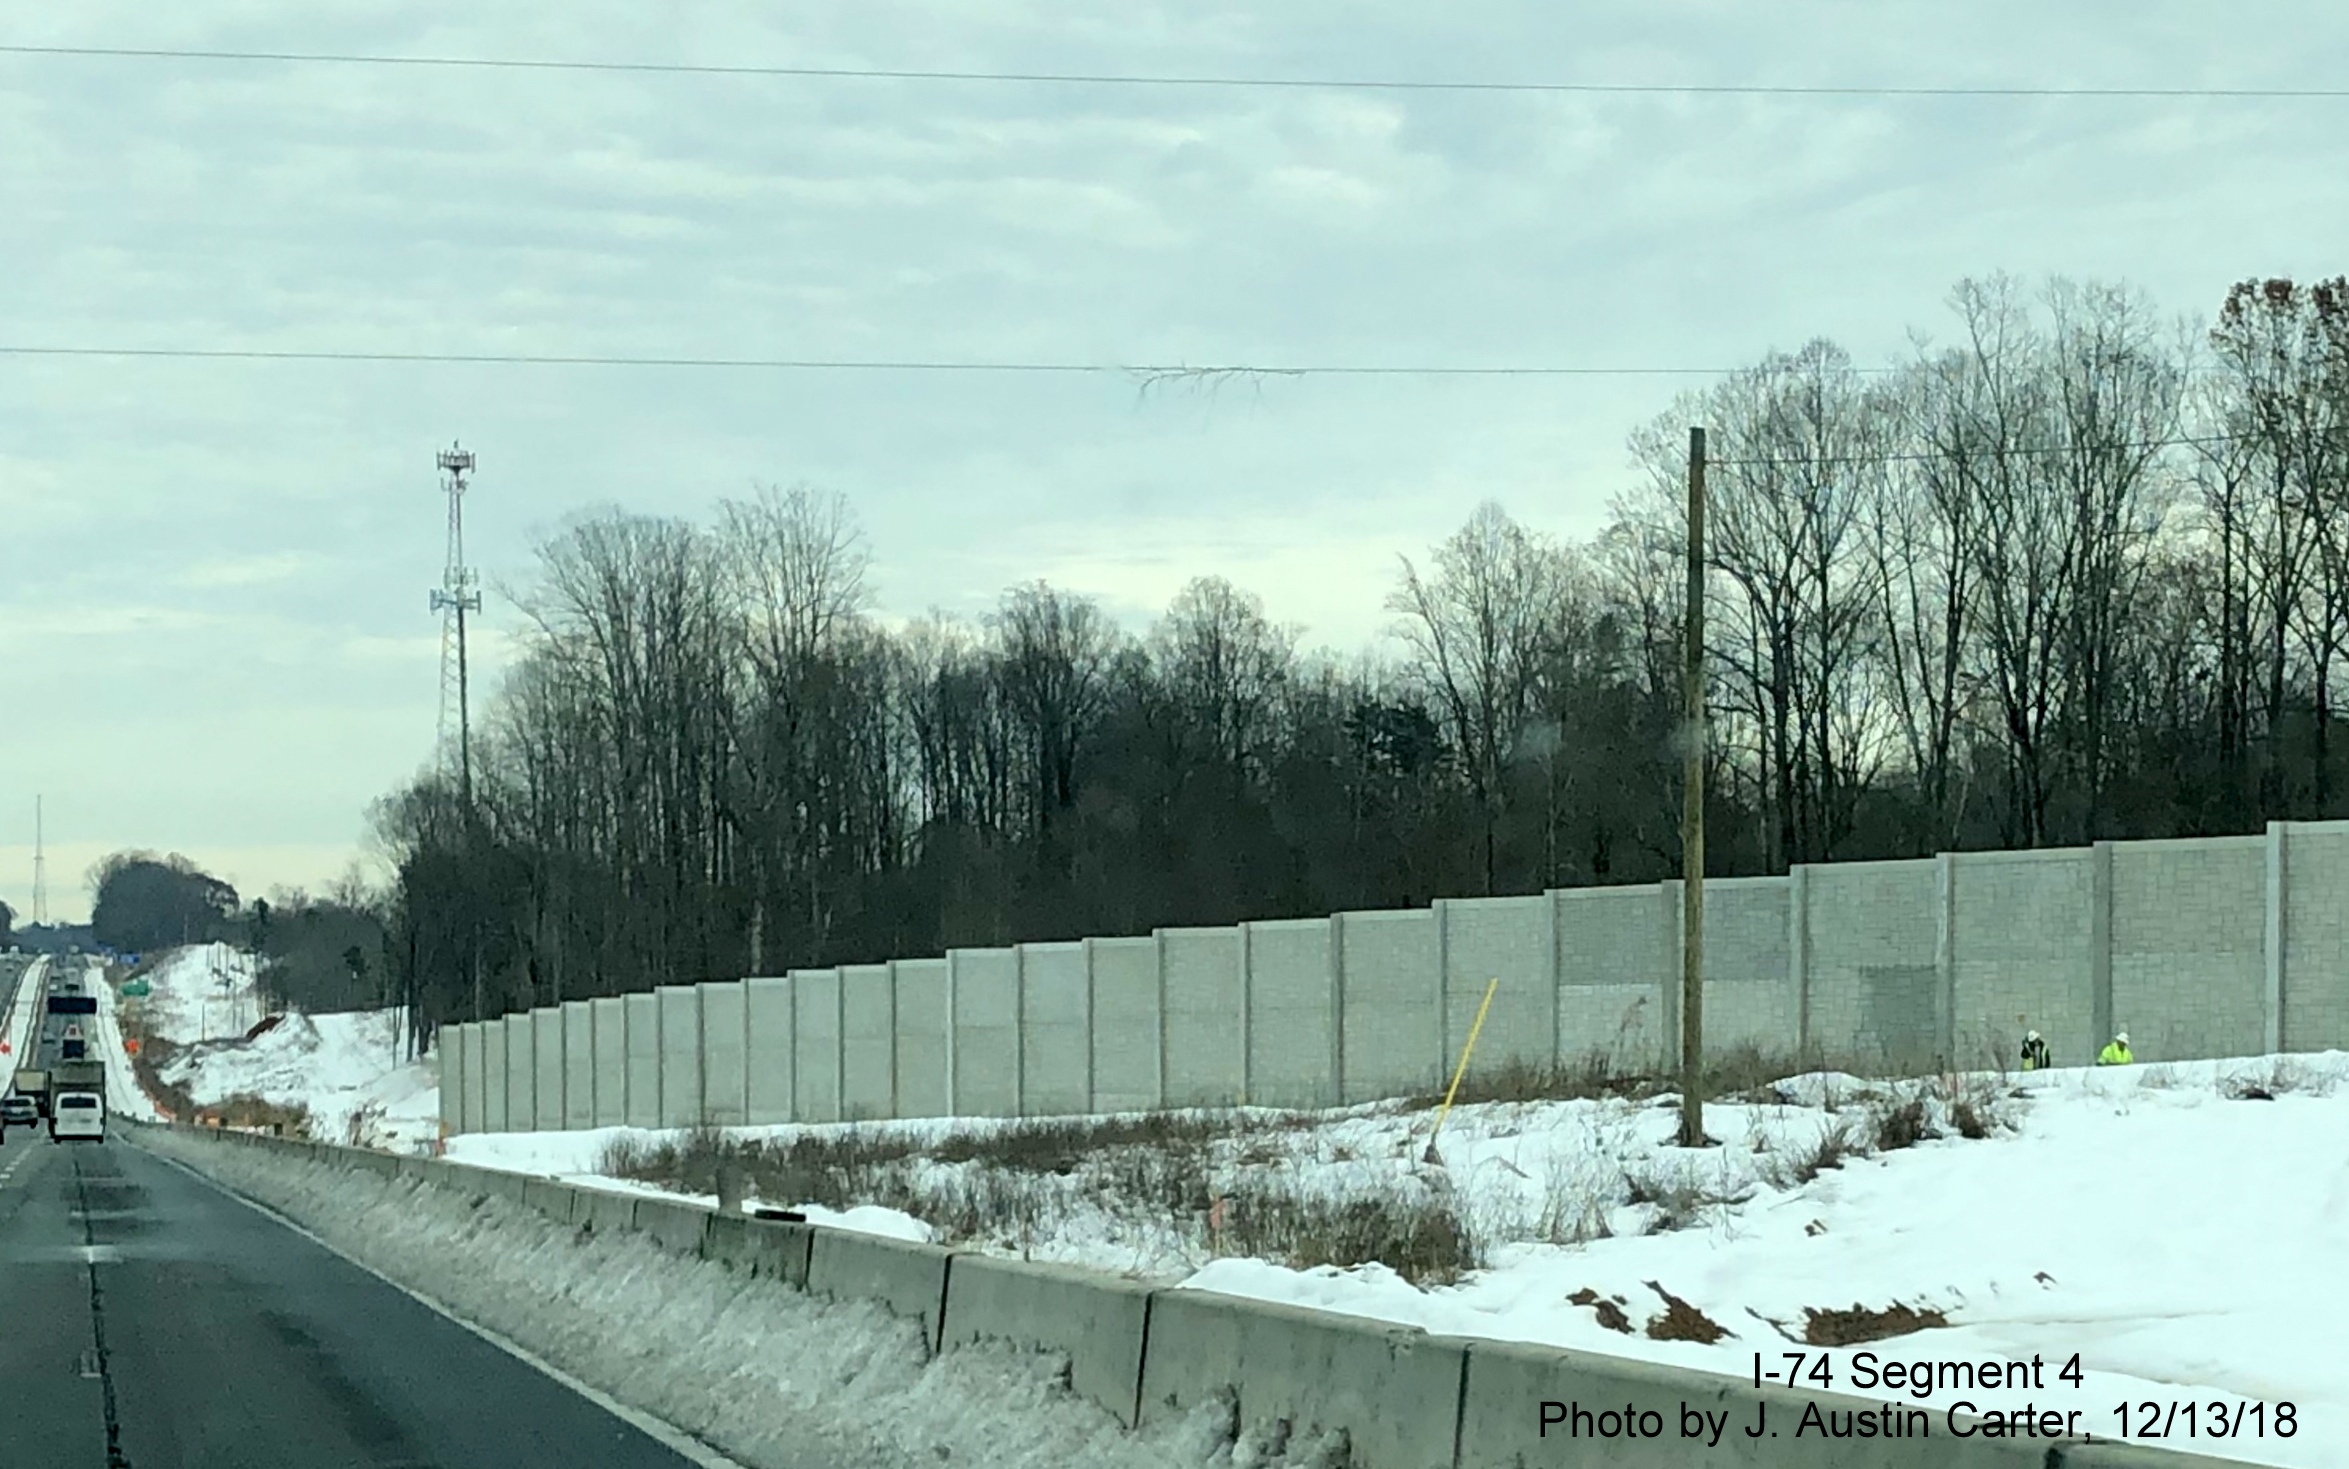 Image of noise wall being built along future ramp from I-74/Winston-Salem Beltway to Business 40 East, by J. Austin Carter